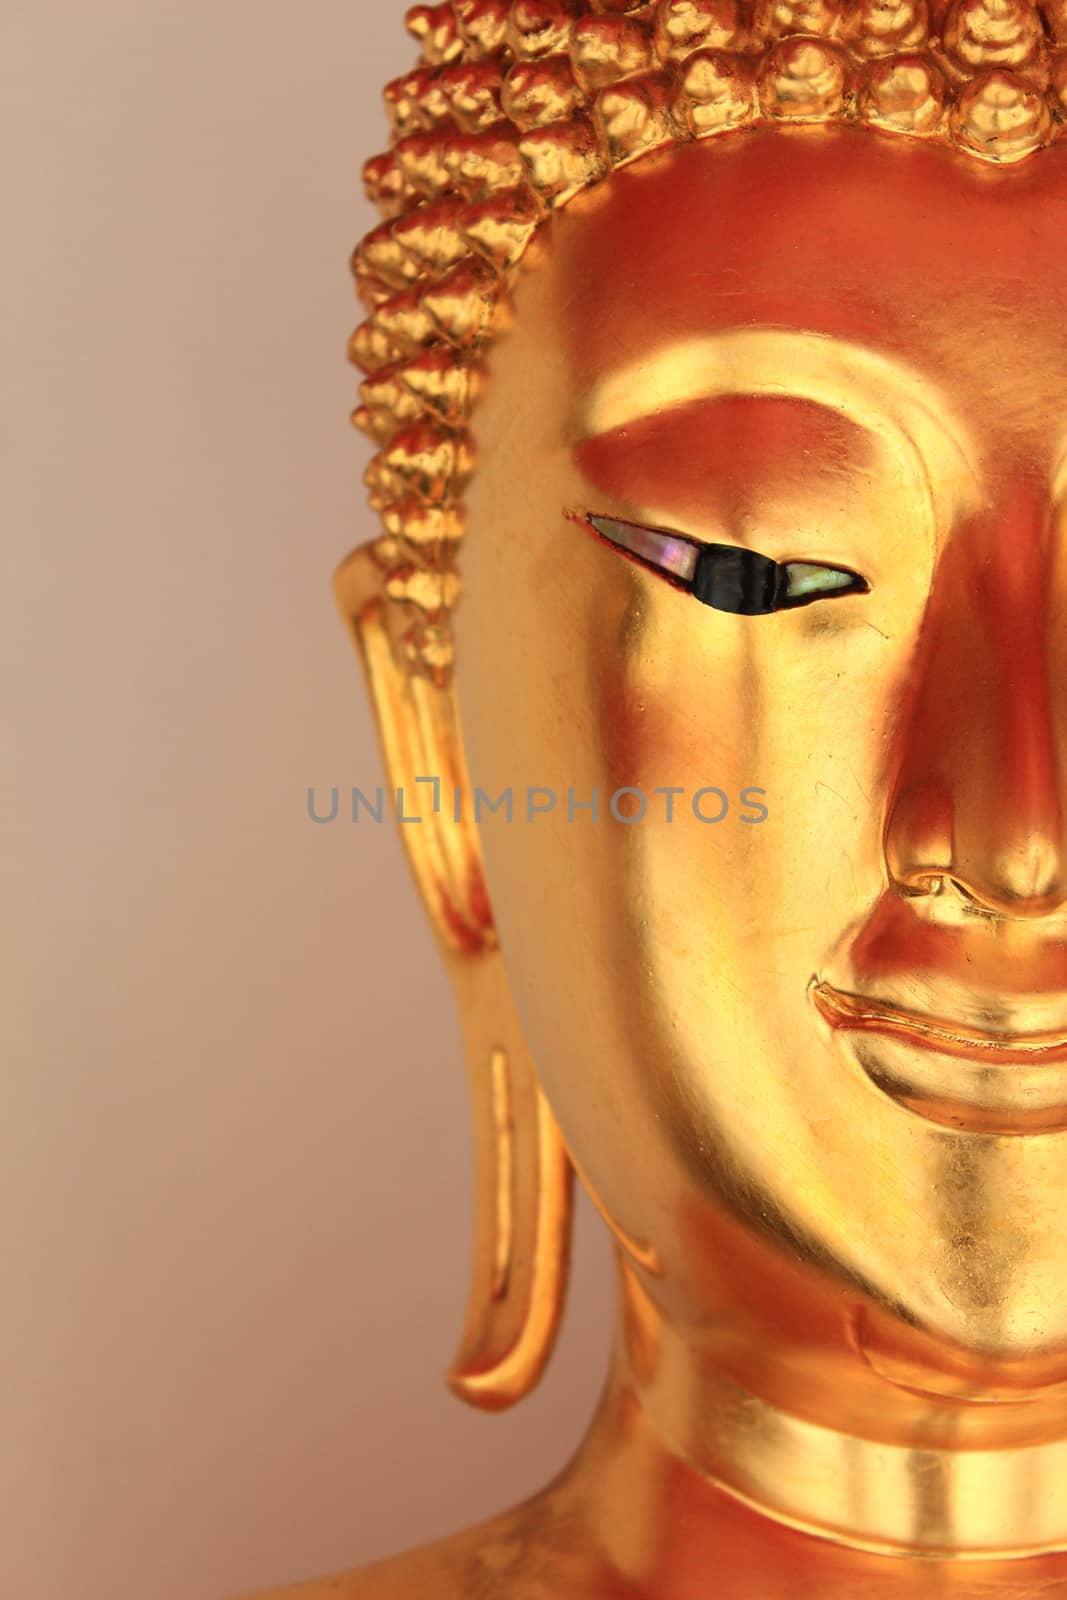 Face of Golden Buddha Statue at Wat Pho